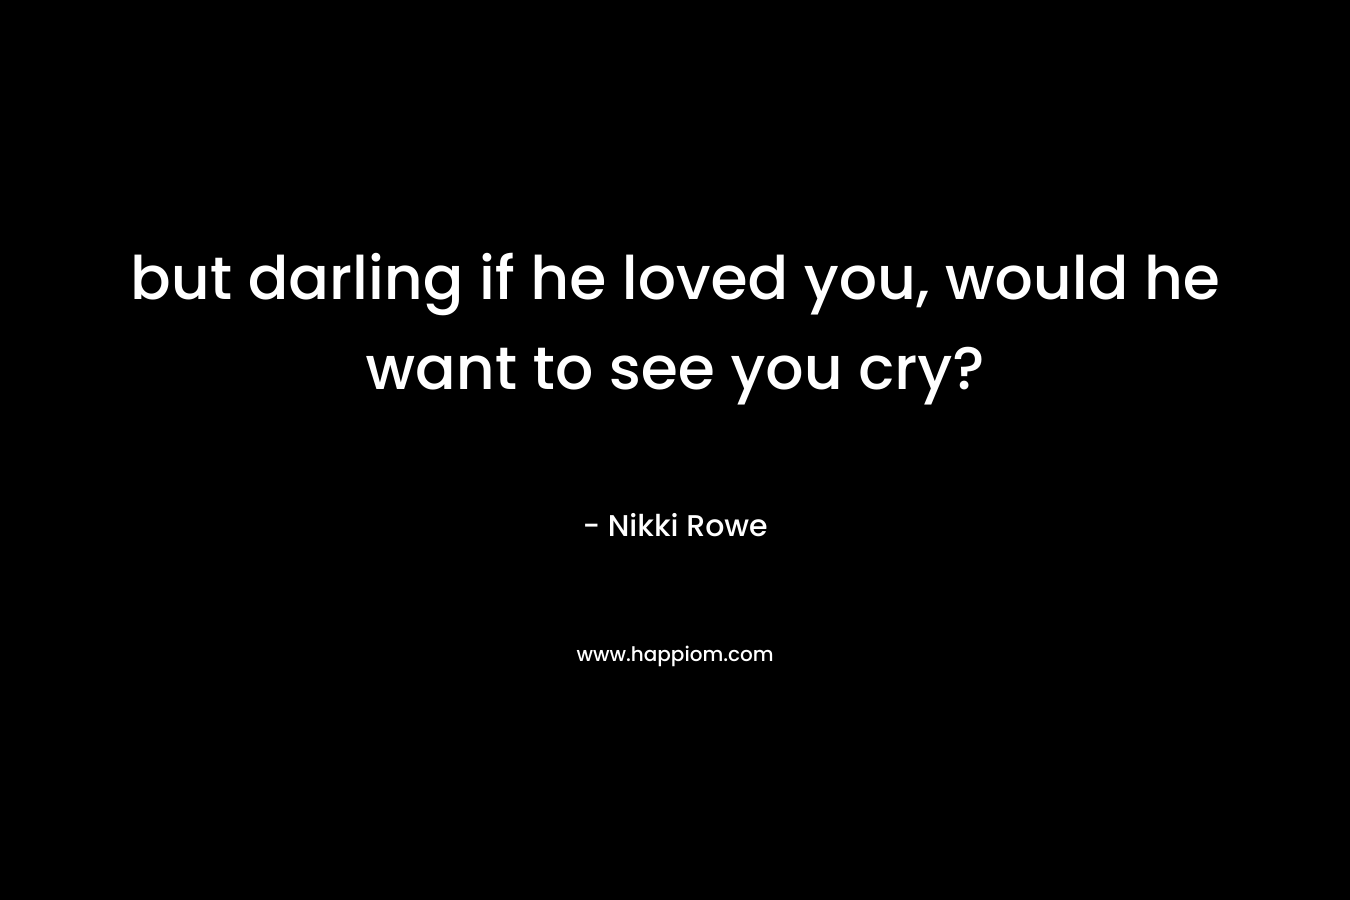 but darling if he loved you, would he want to see you cry?